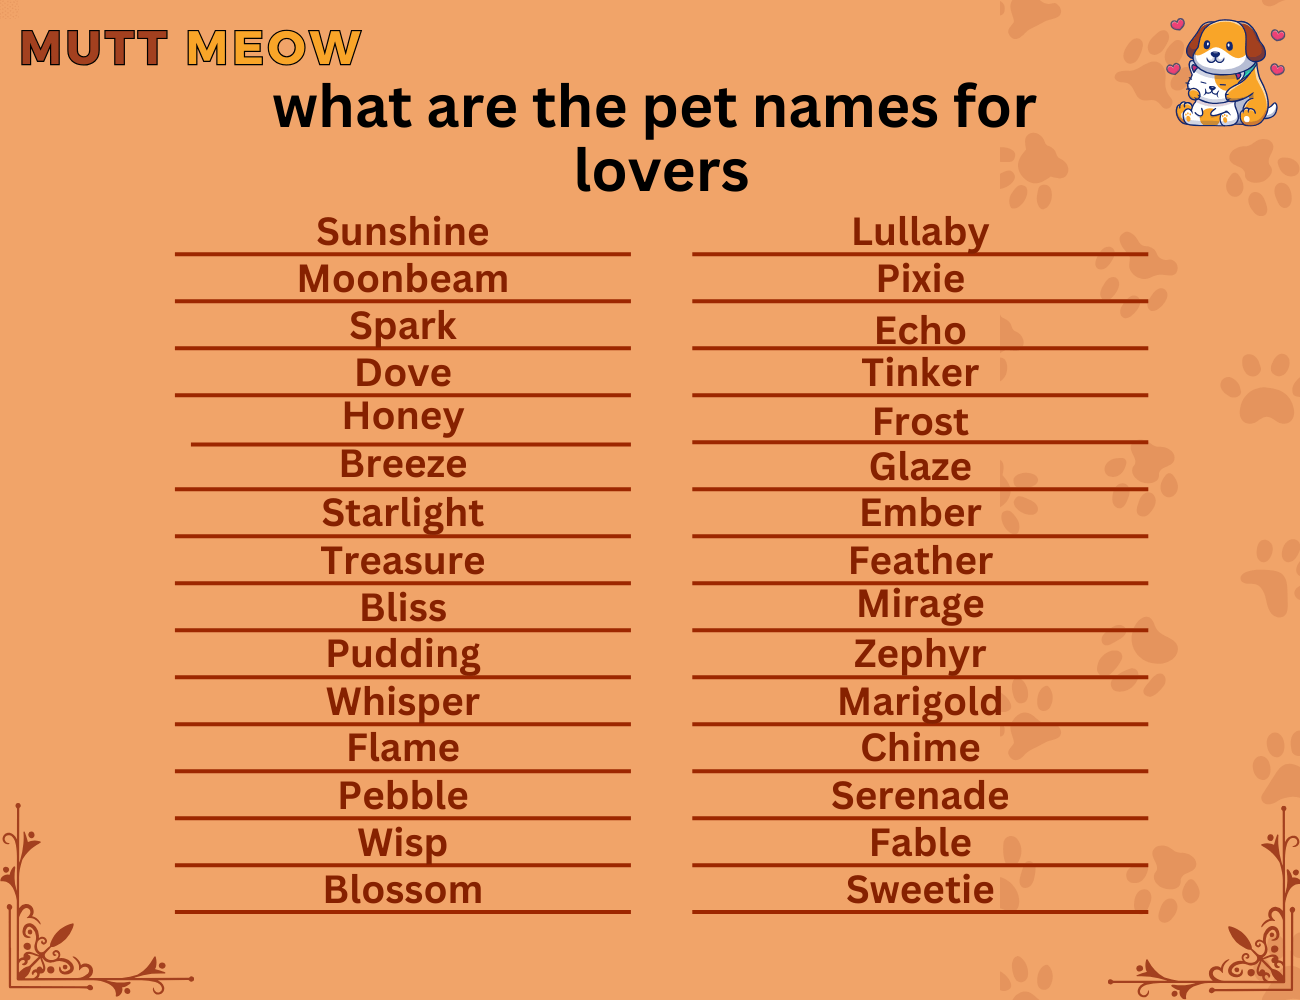 Bulk 1 What Are The Pet Names For Lovers 1 